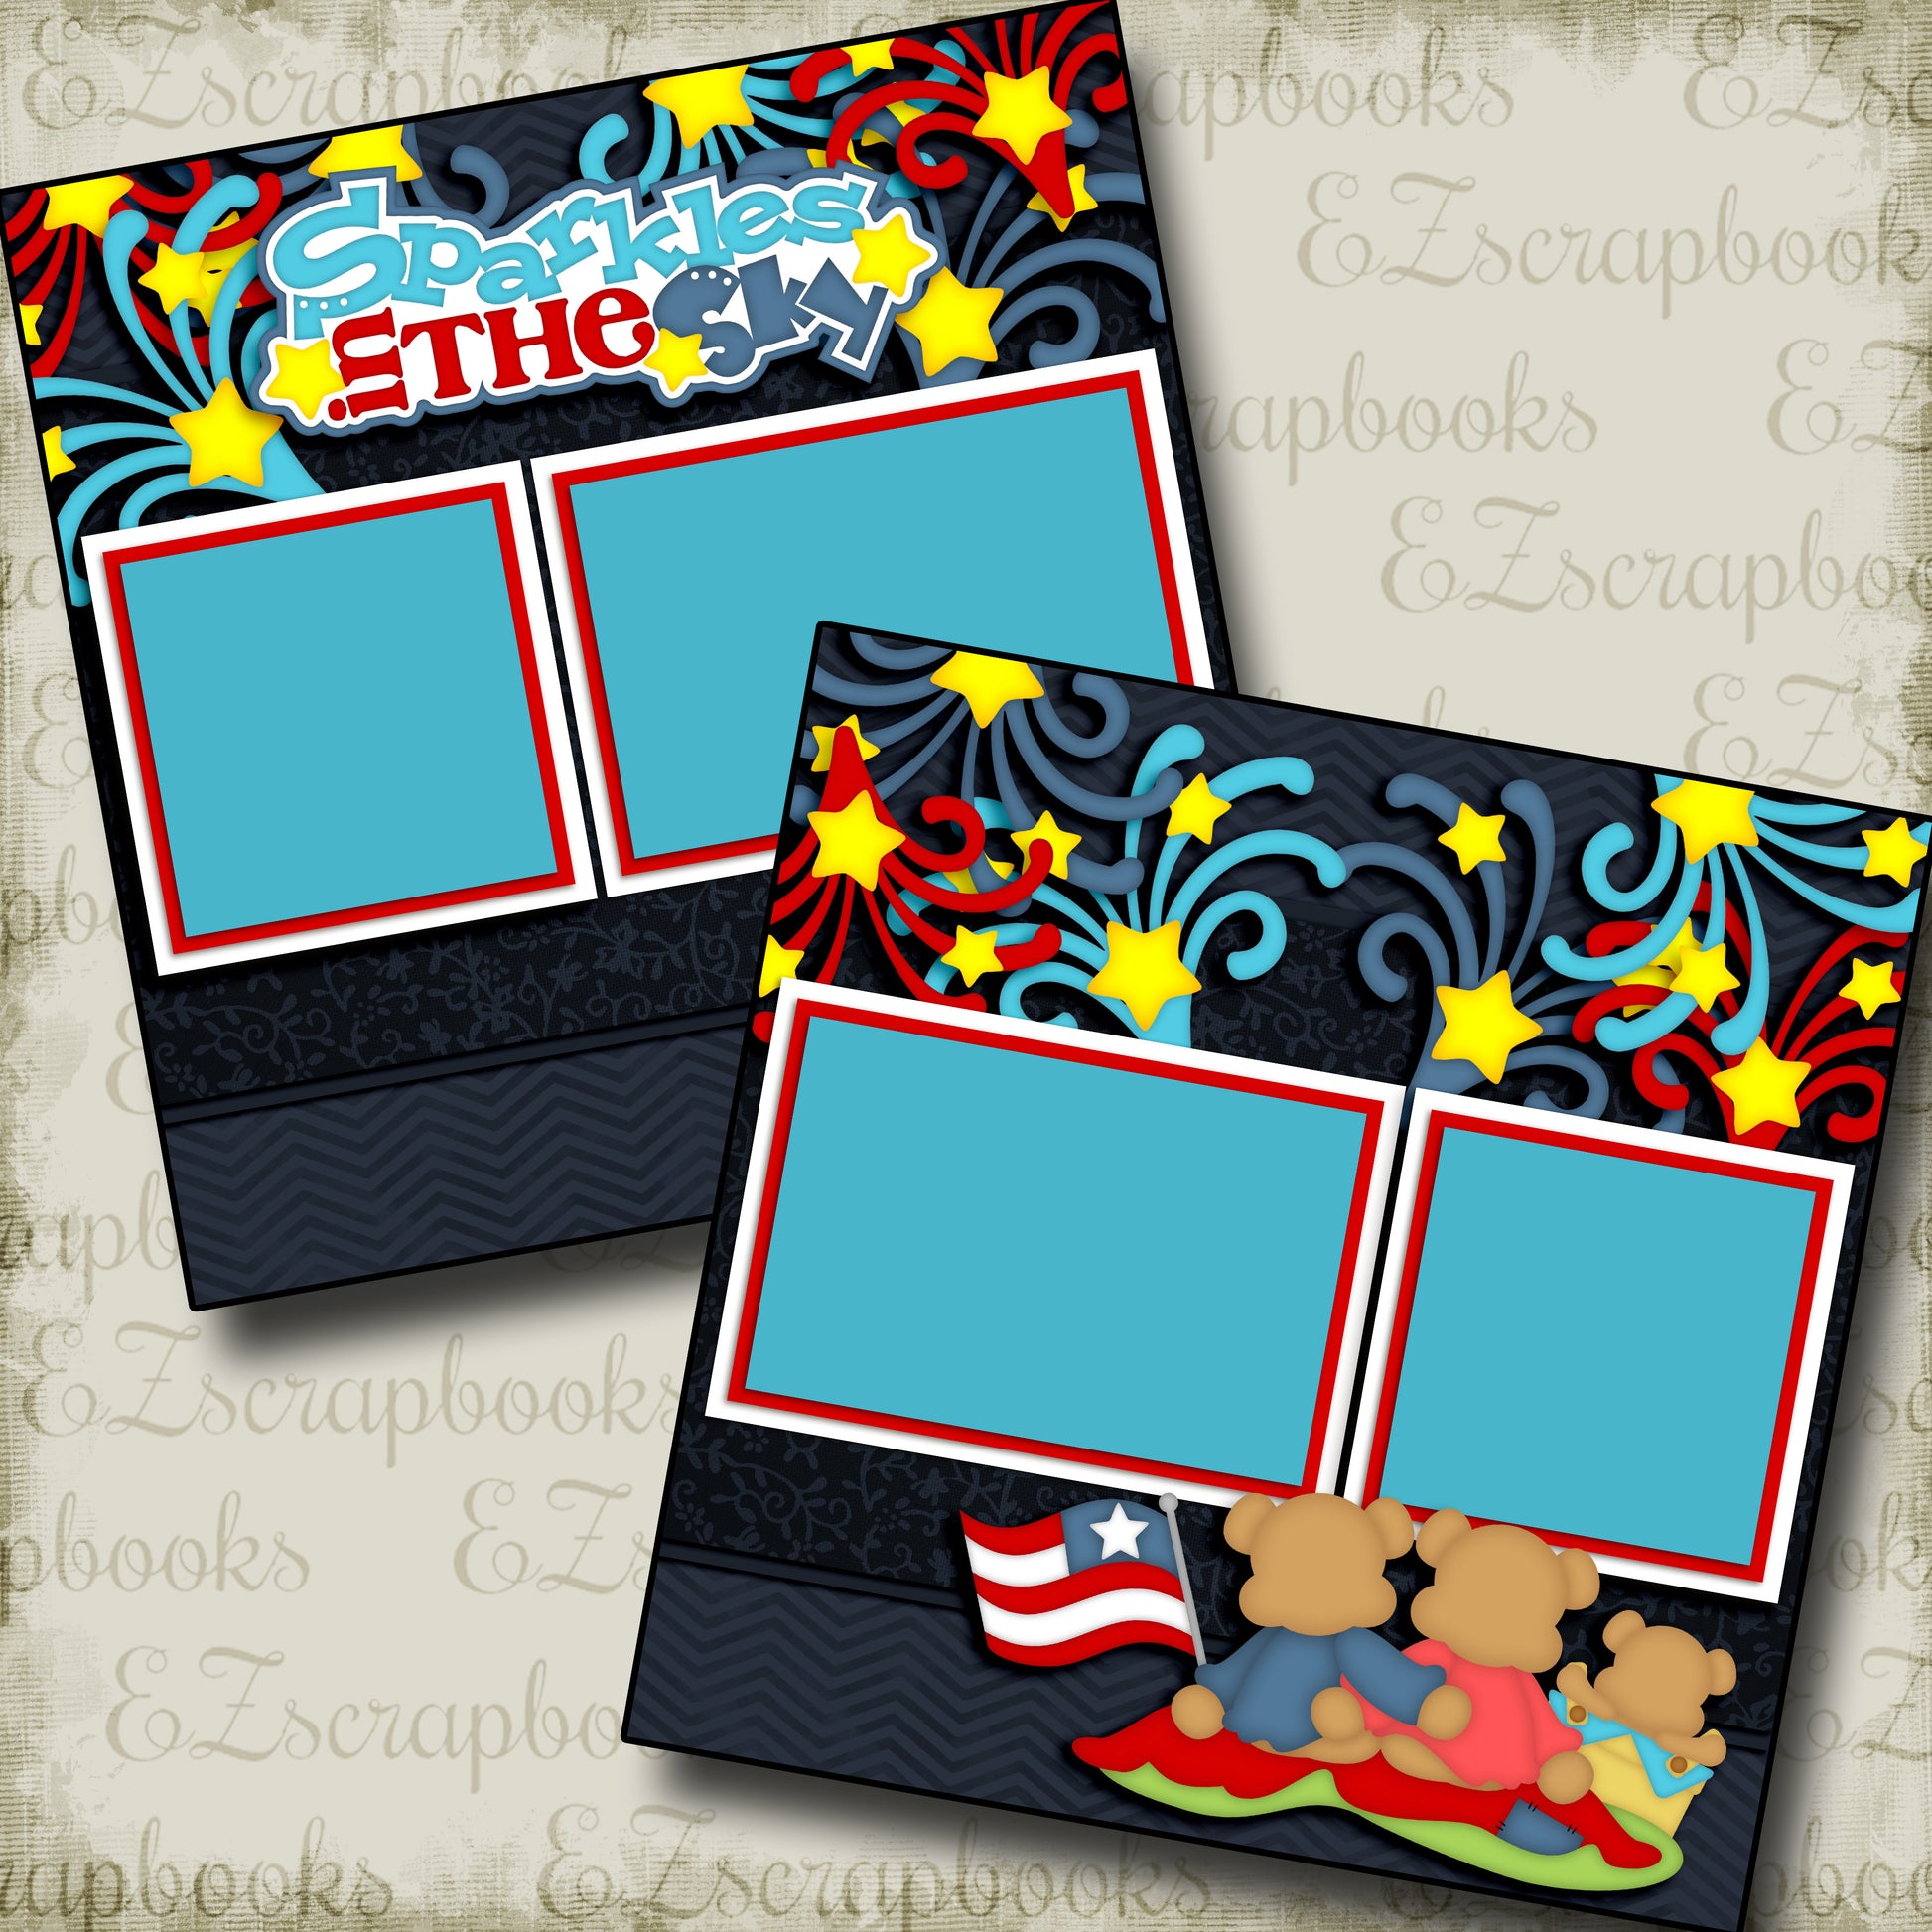 Sparkles in the Sky - 2819 - EZscrapbooks Scrapbook Layouts July 4th - Patriotic